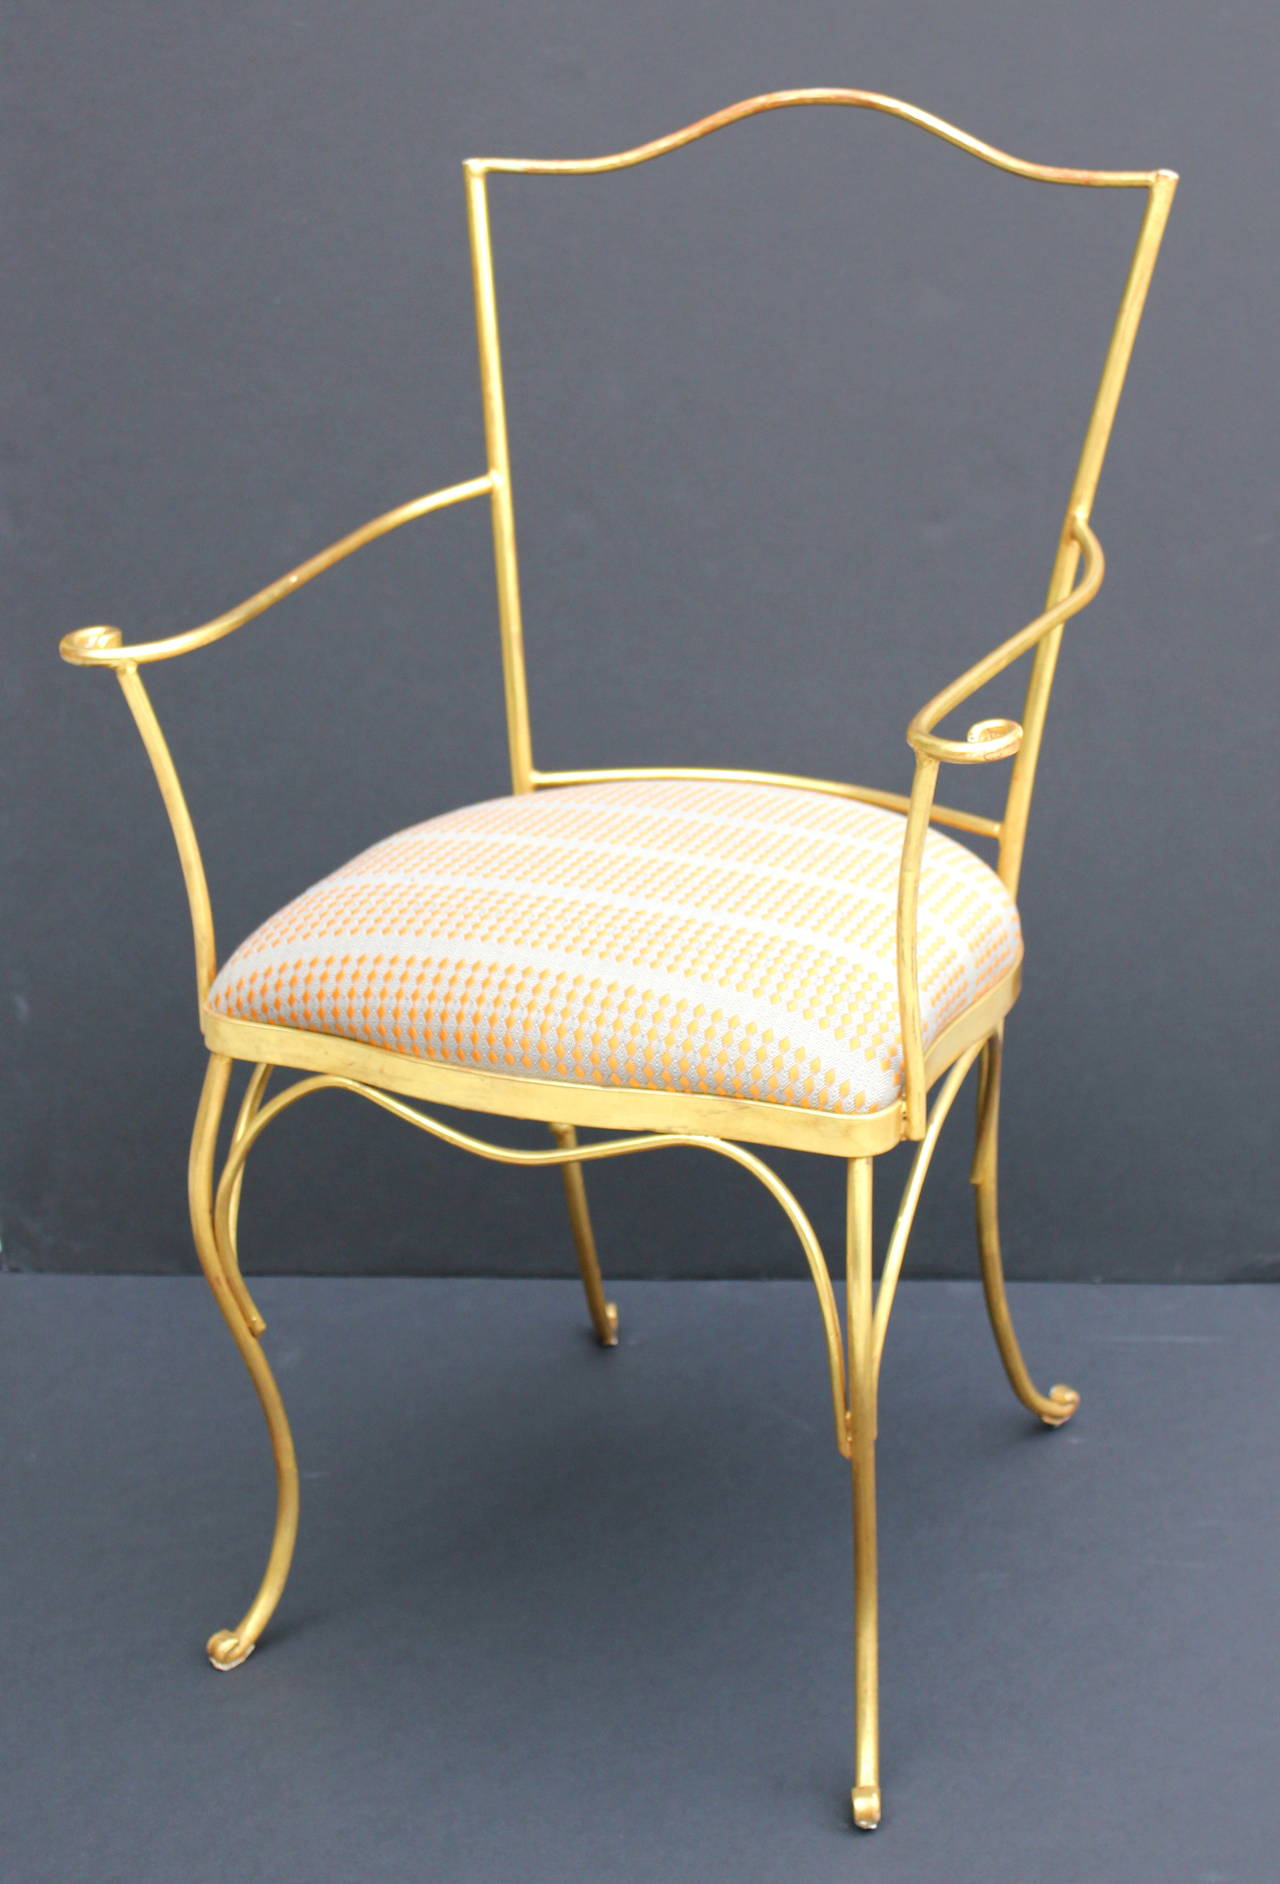 French iron chair with 22-karat gold gilt. George Smith fabric. 
1940s. 
Great desk, vanity or closet chair.
Arm Height is 26